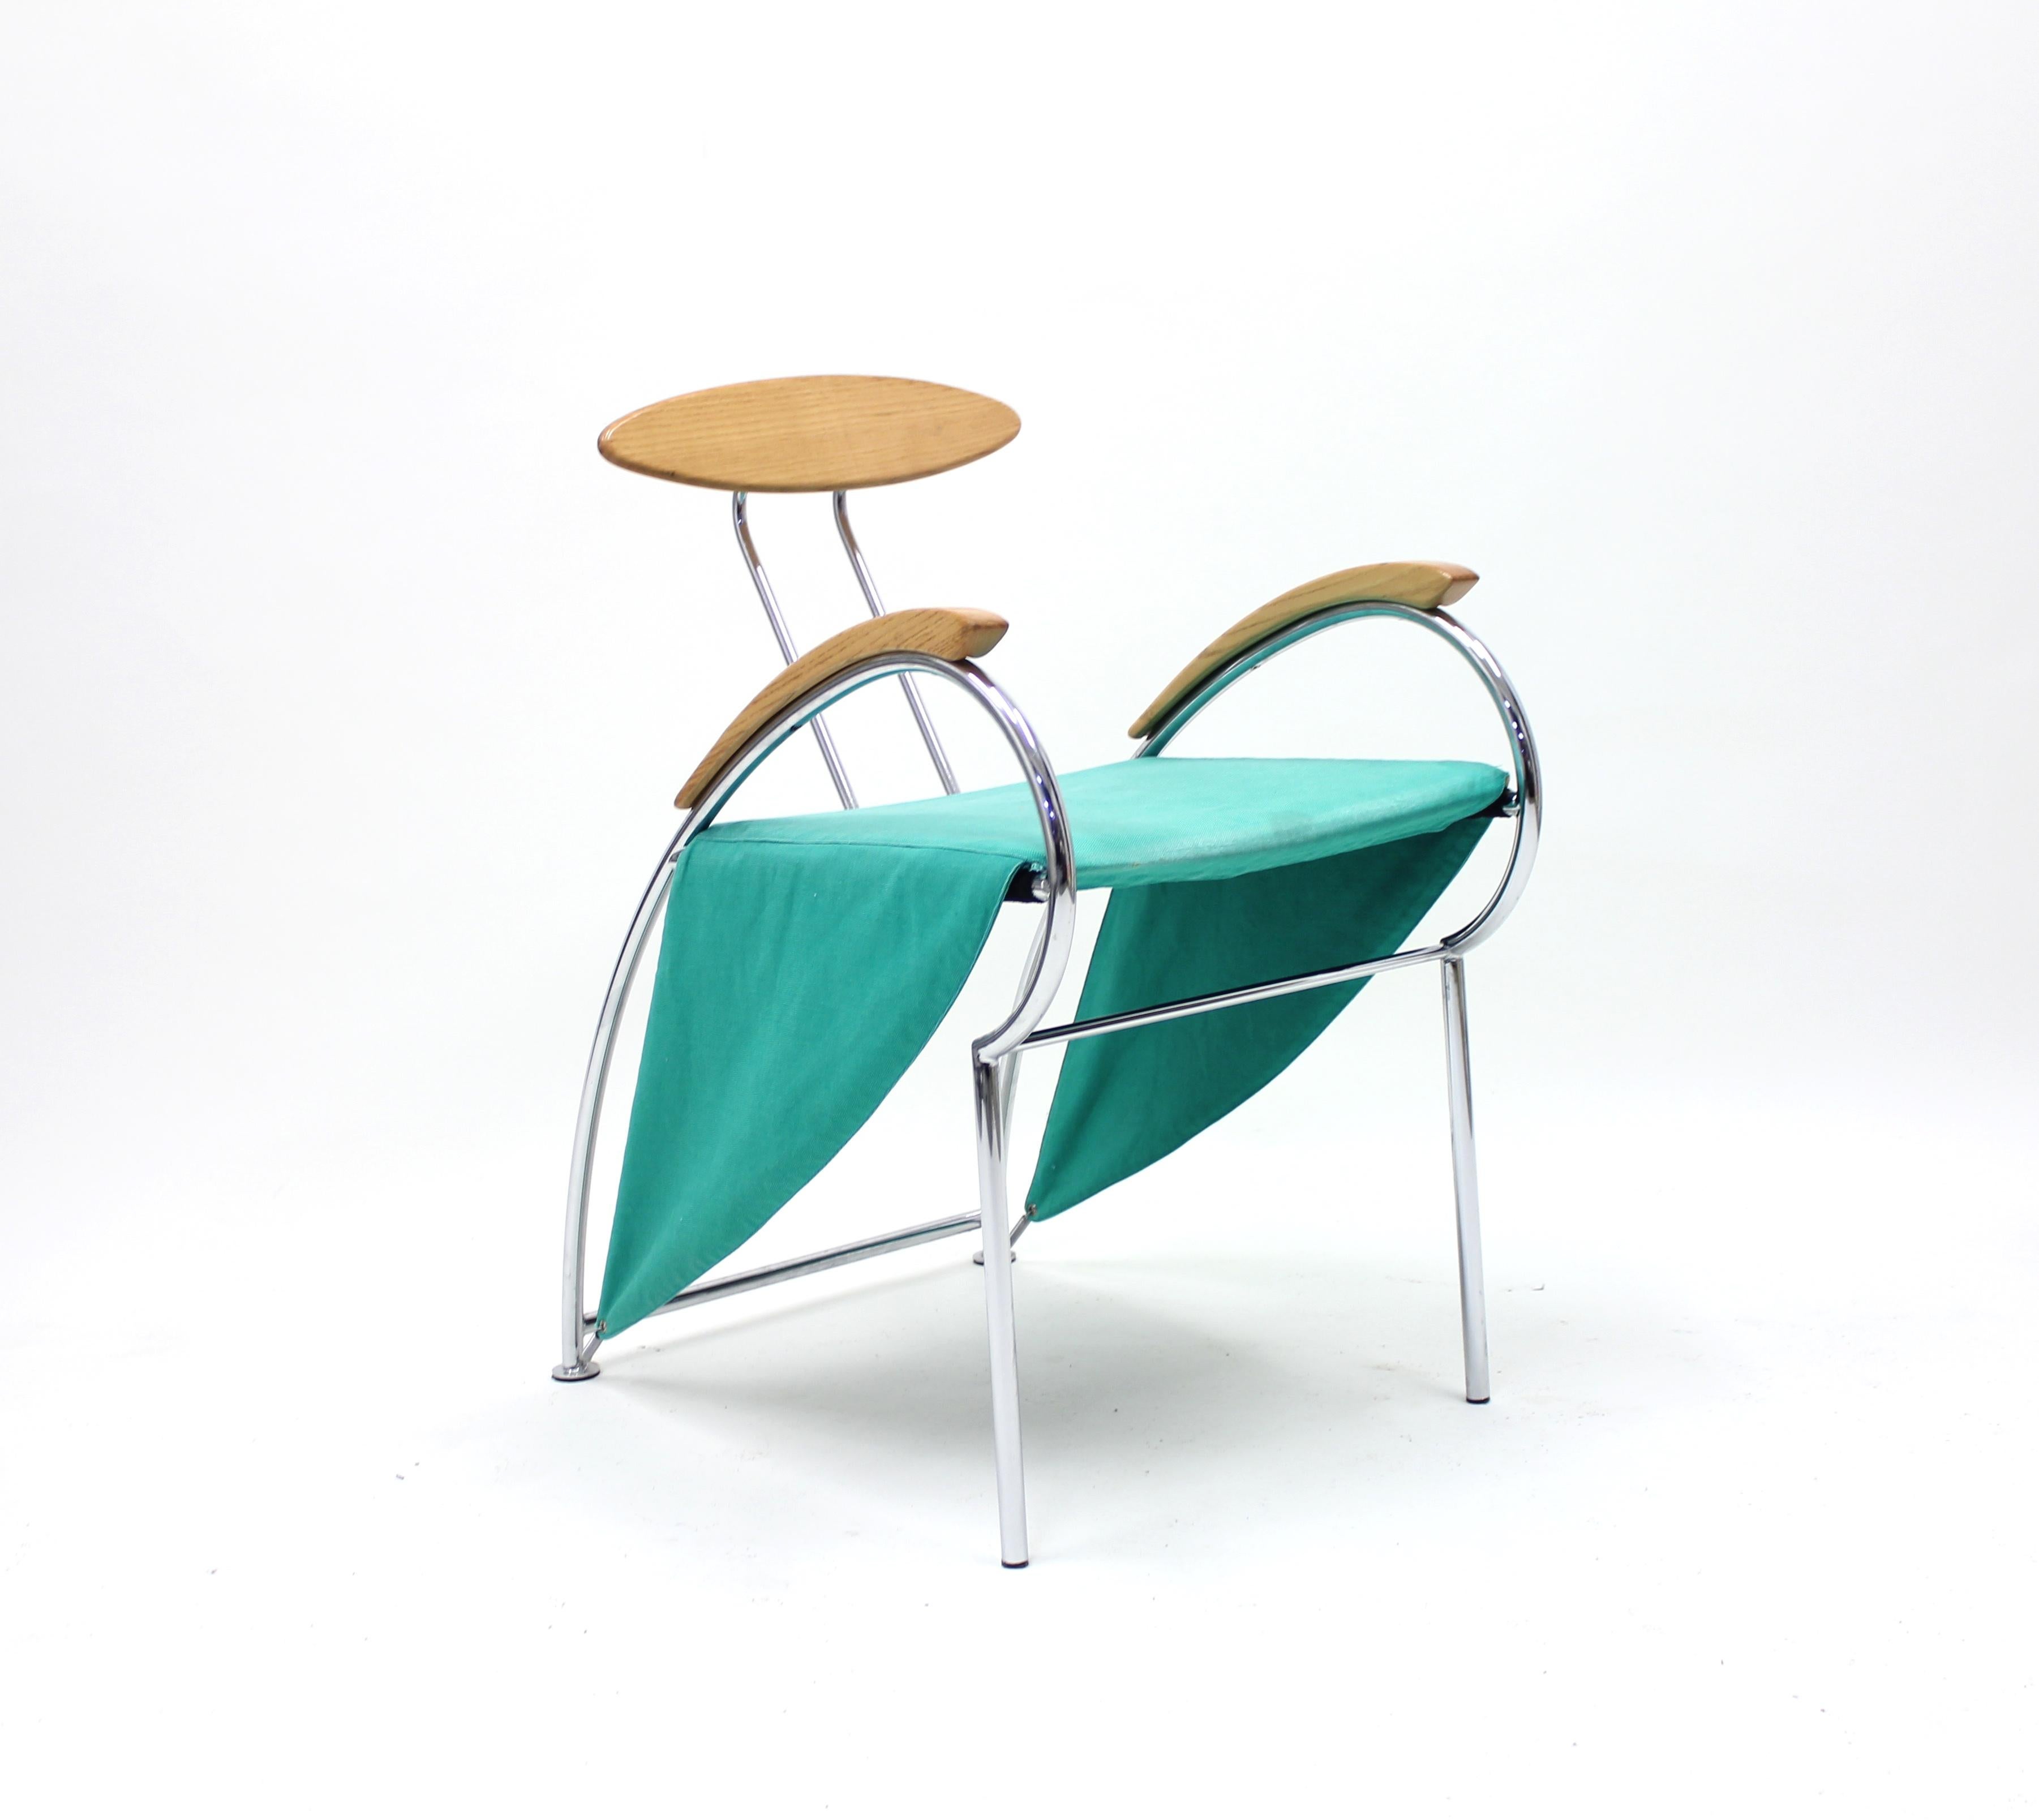 Notorious chair by Massimo Iosa Ghini for Moroso designed in 1988. A true post modernist masterpiece which is quite rare on the market. This piece is an early example in an untouched original condition. Light stain on the seat, otherwise in a very